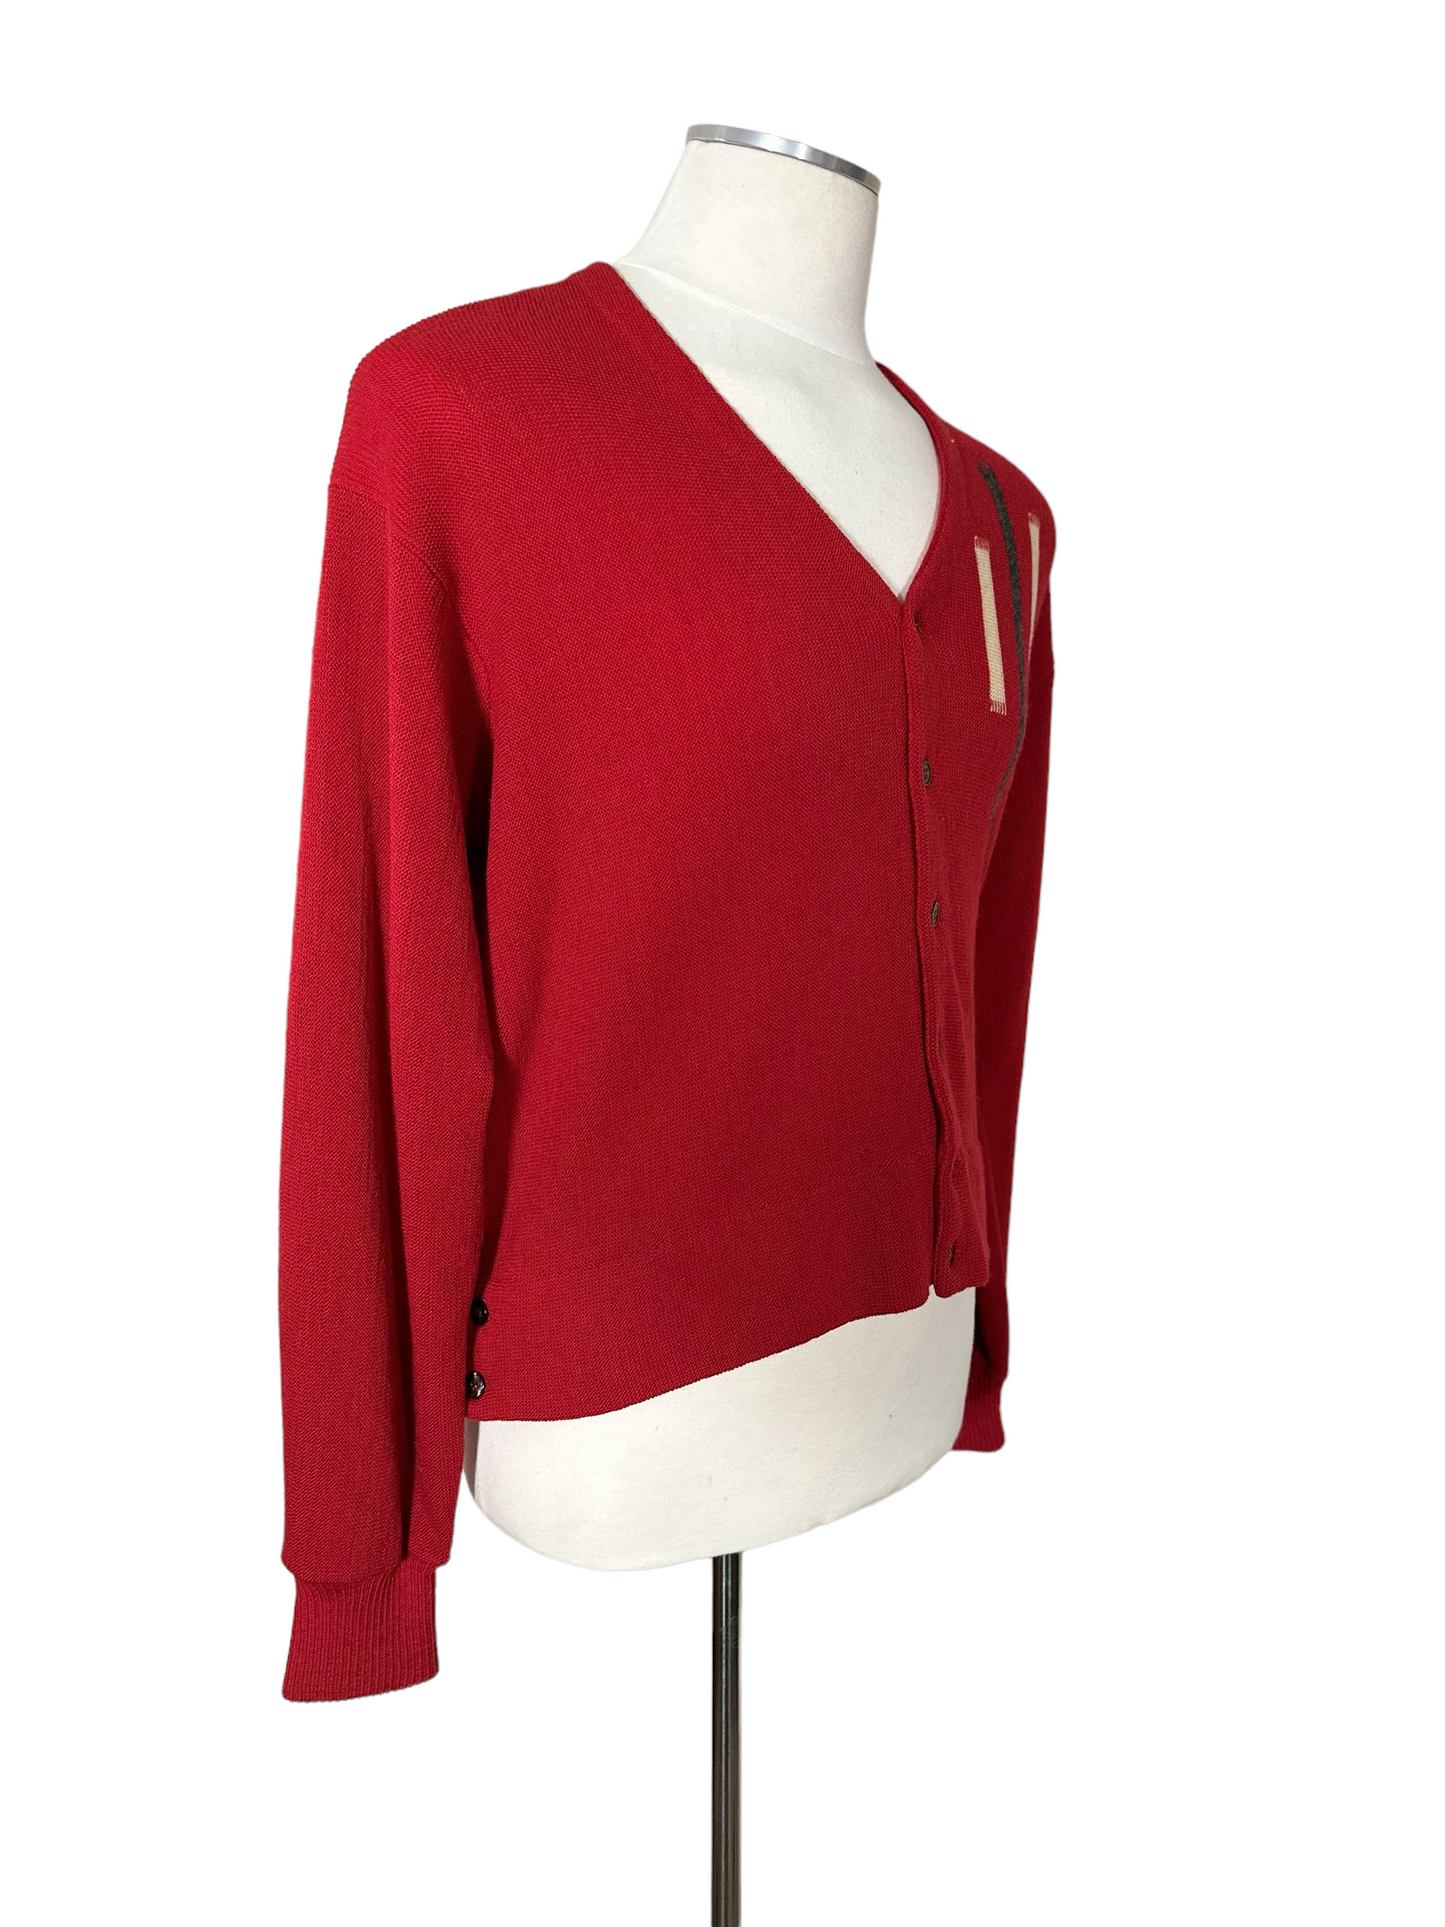 Right Quarter View of Vintage Hastings Red Wool Cardigan | Vintage Clothing Seattle